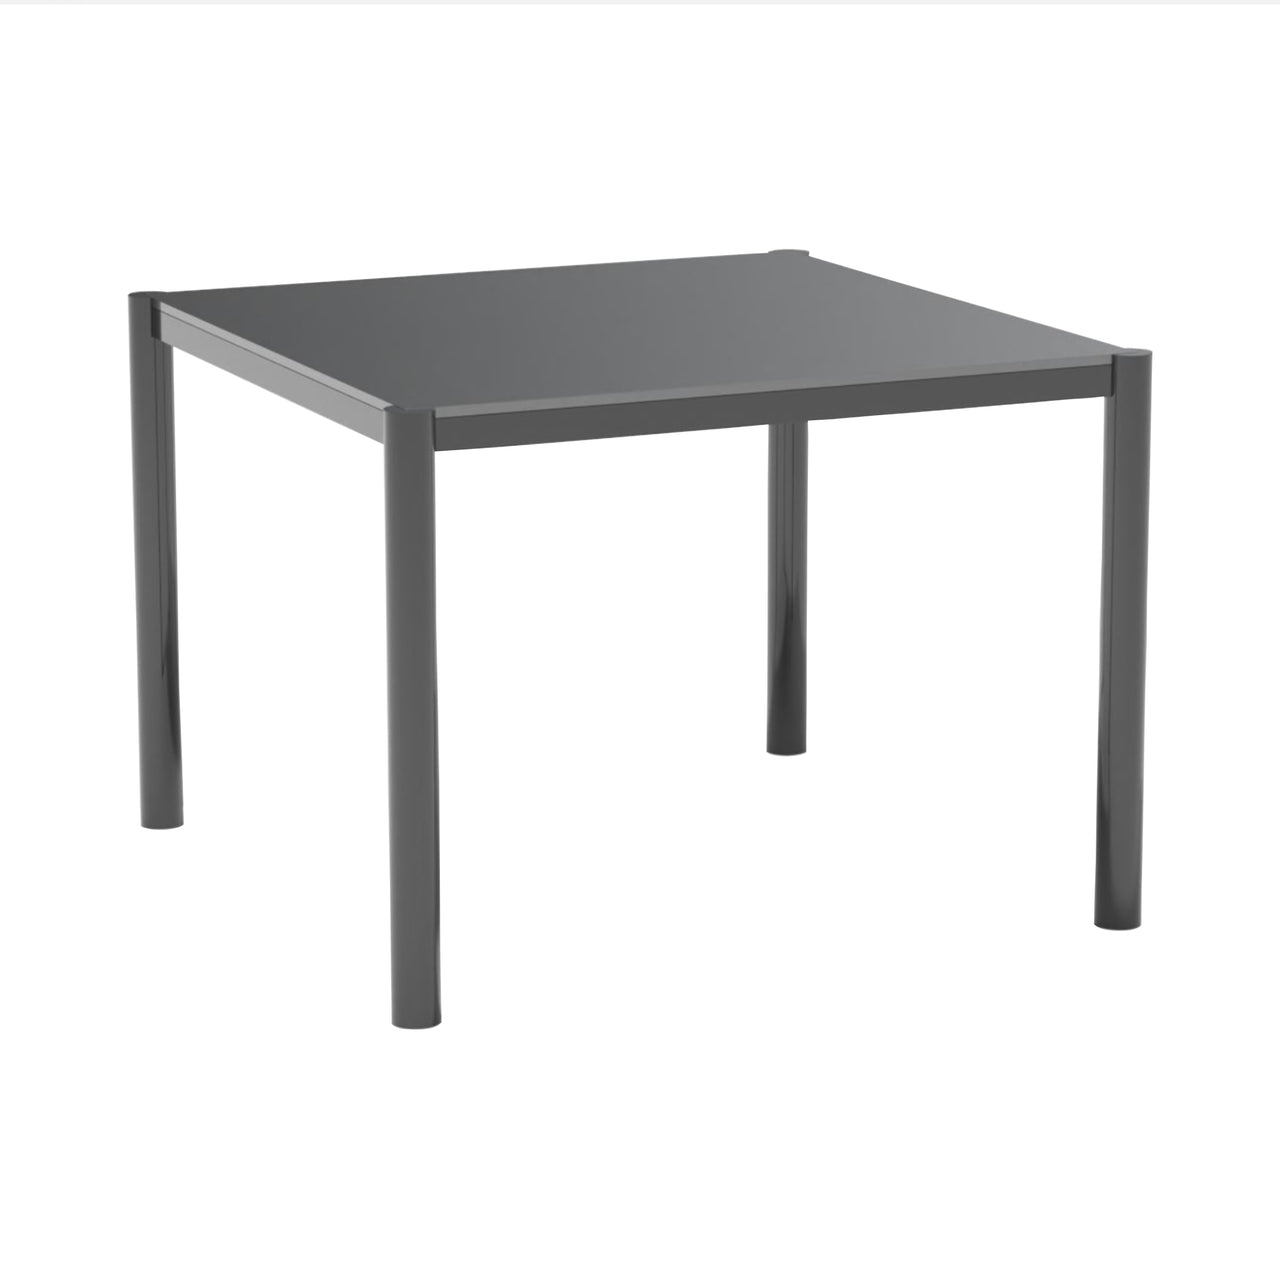 Get-Together Dining Table: Square + Smoked Glass + Black